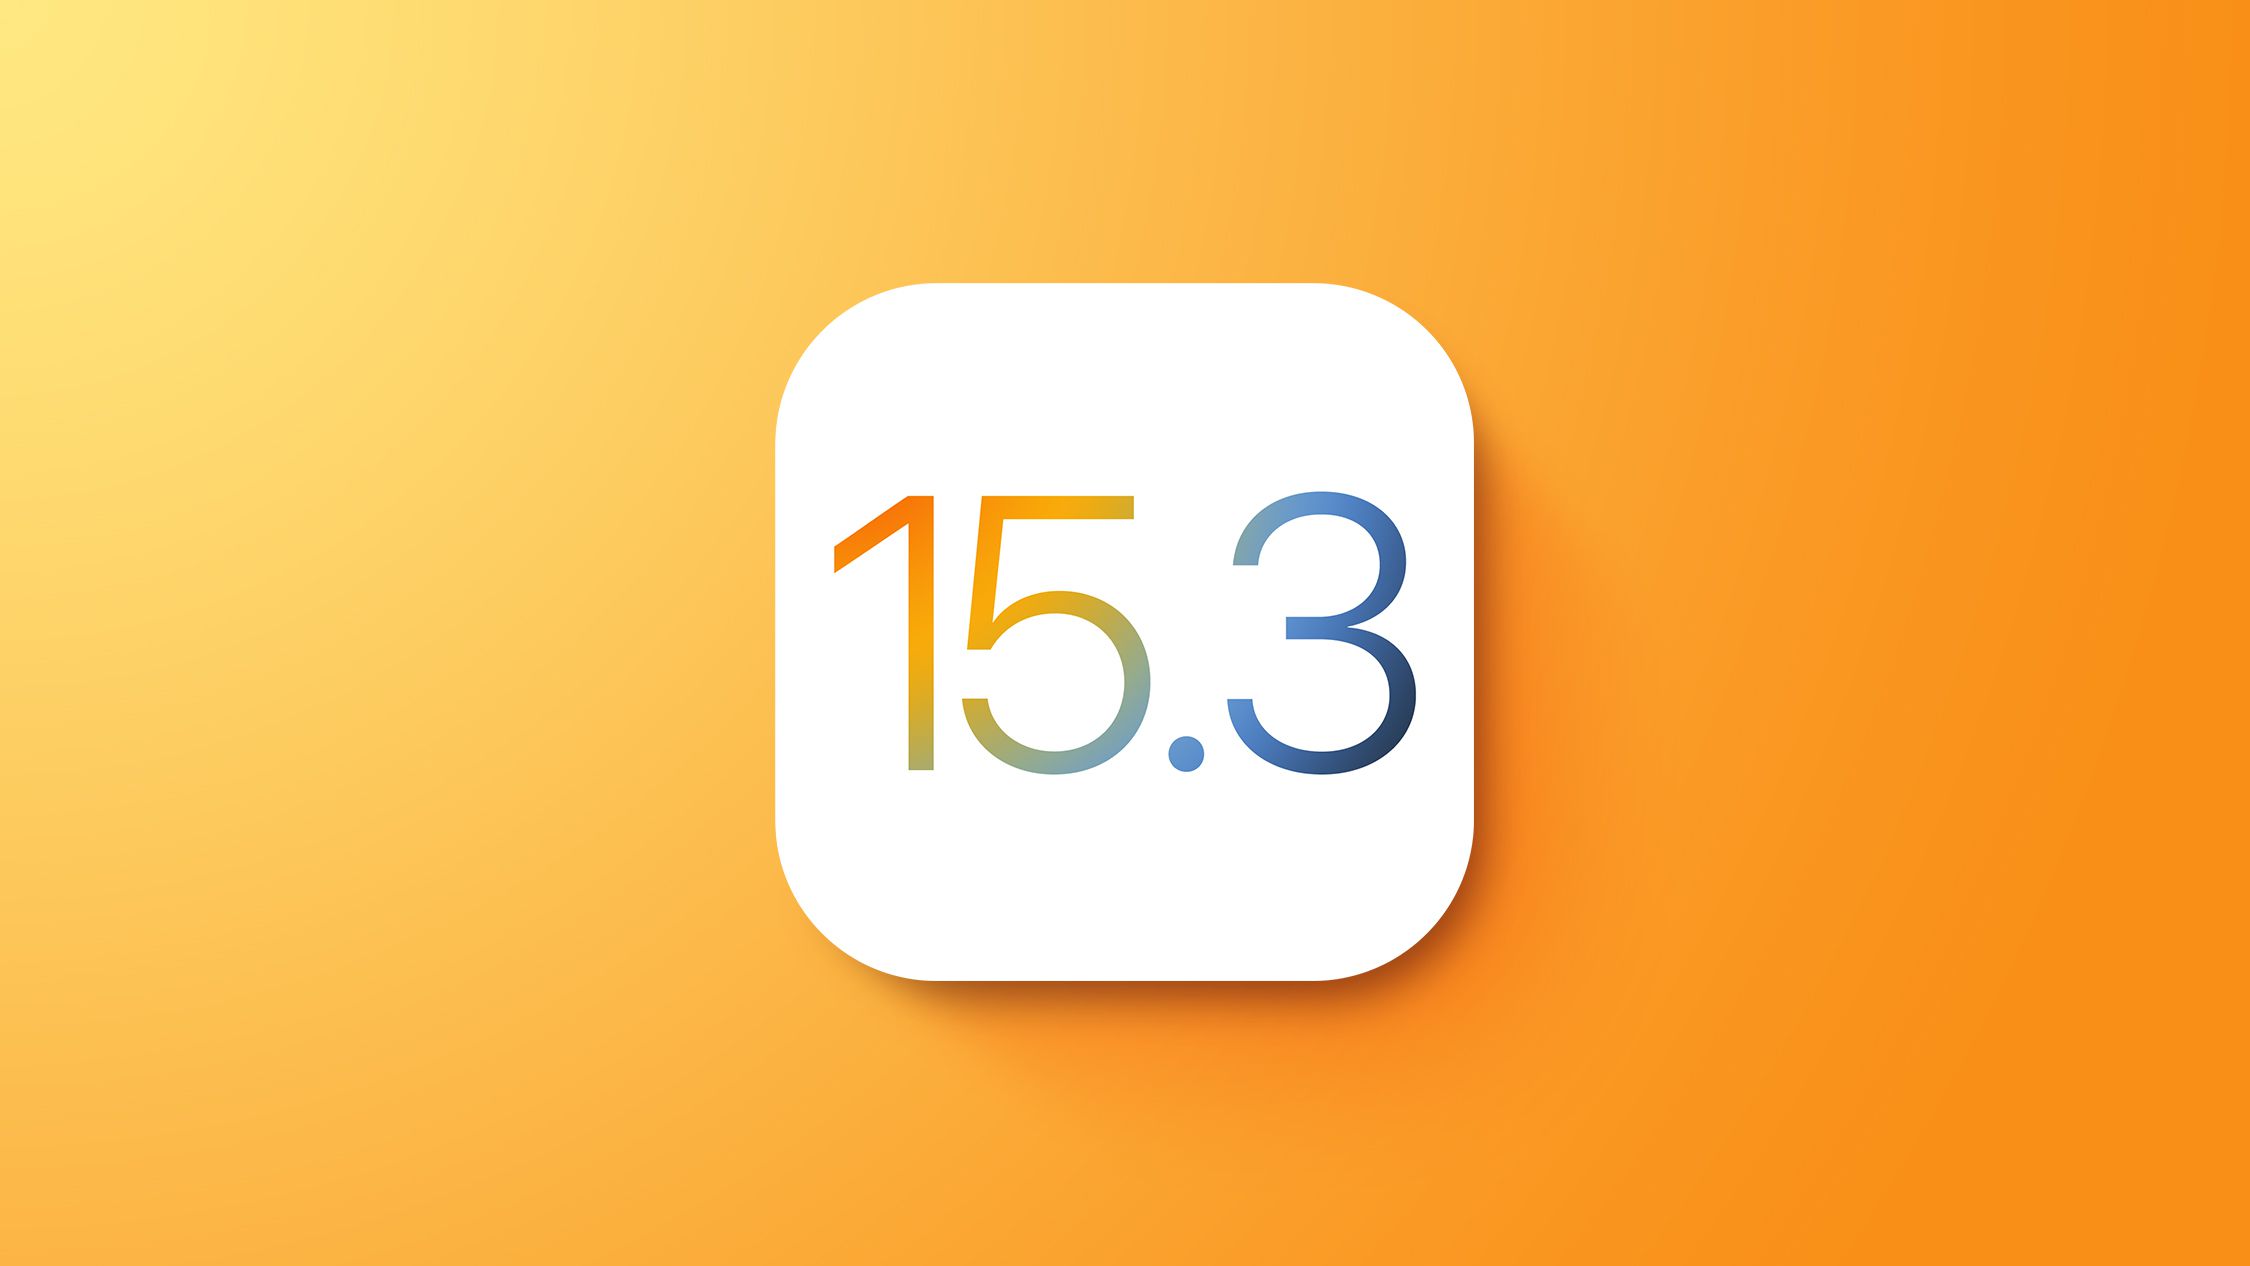 Apple releases iOS 15.3 and iPadOS 15.3 and strongly encourages users to update